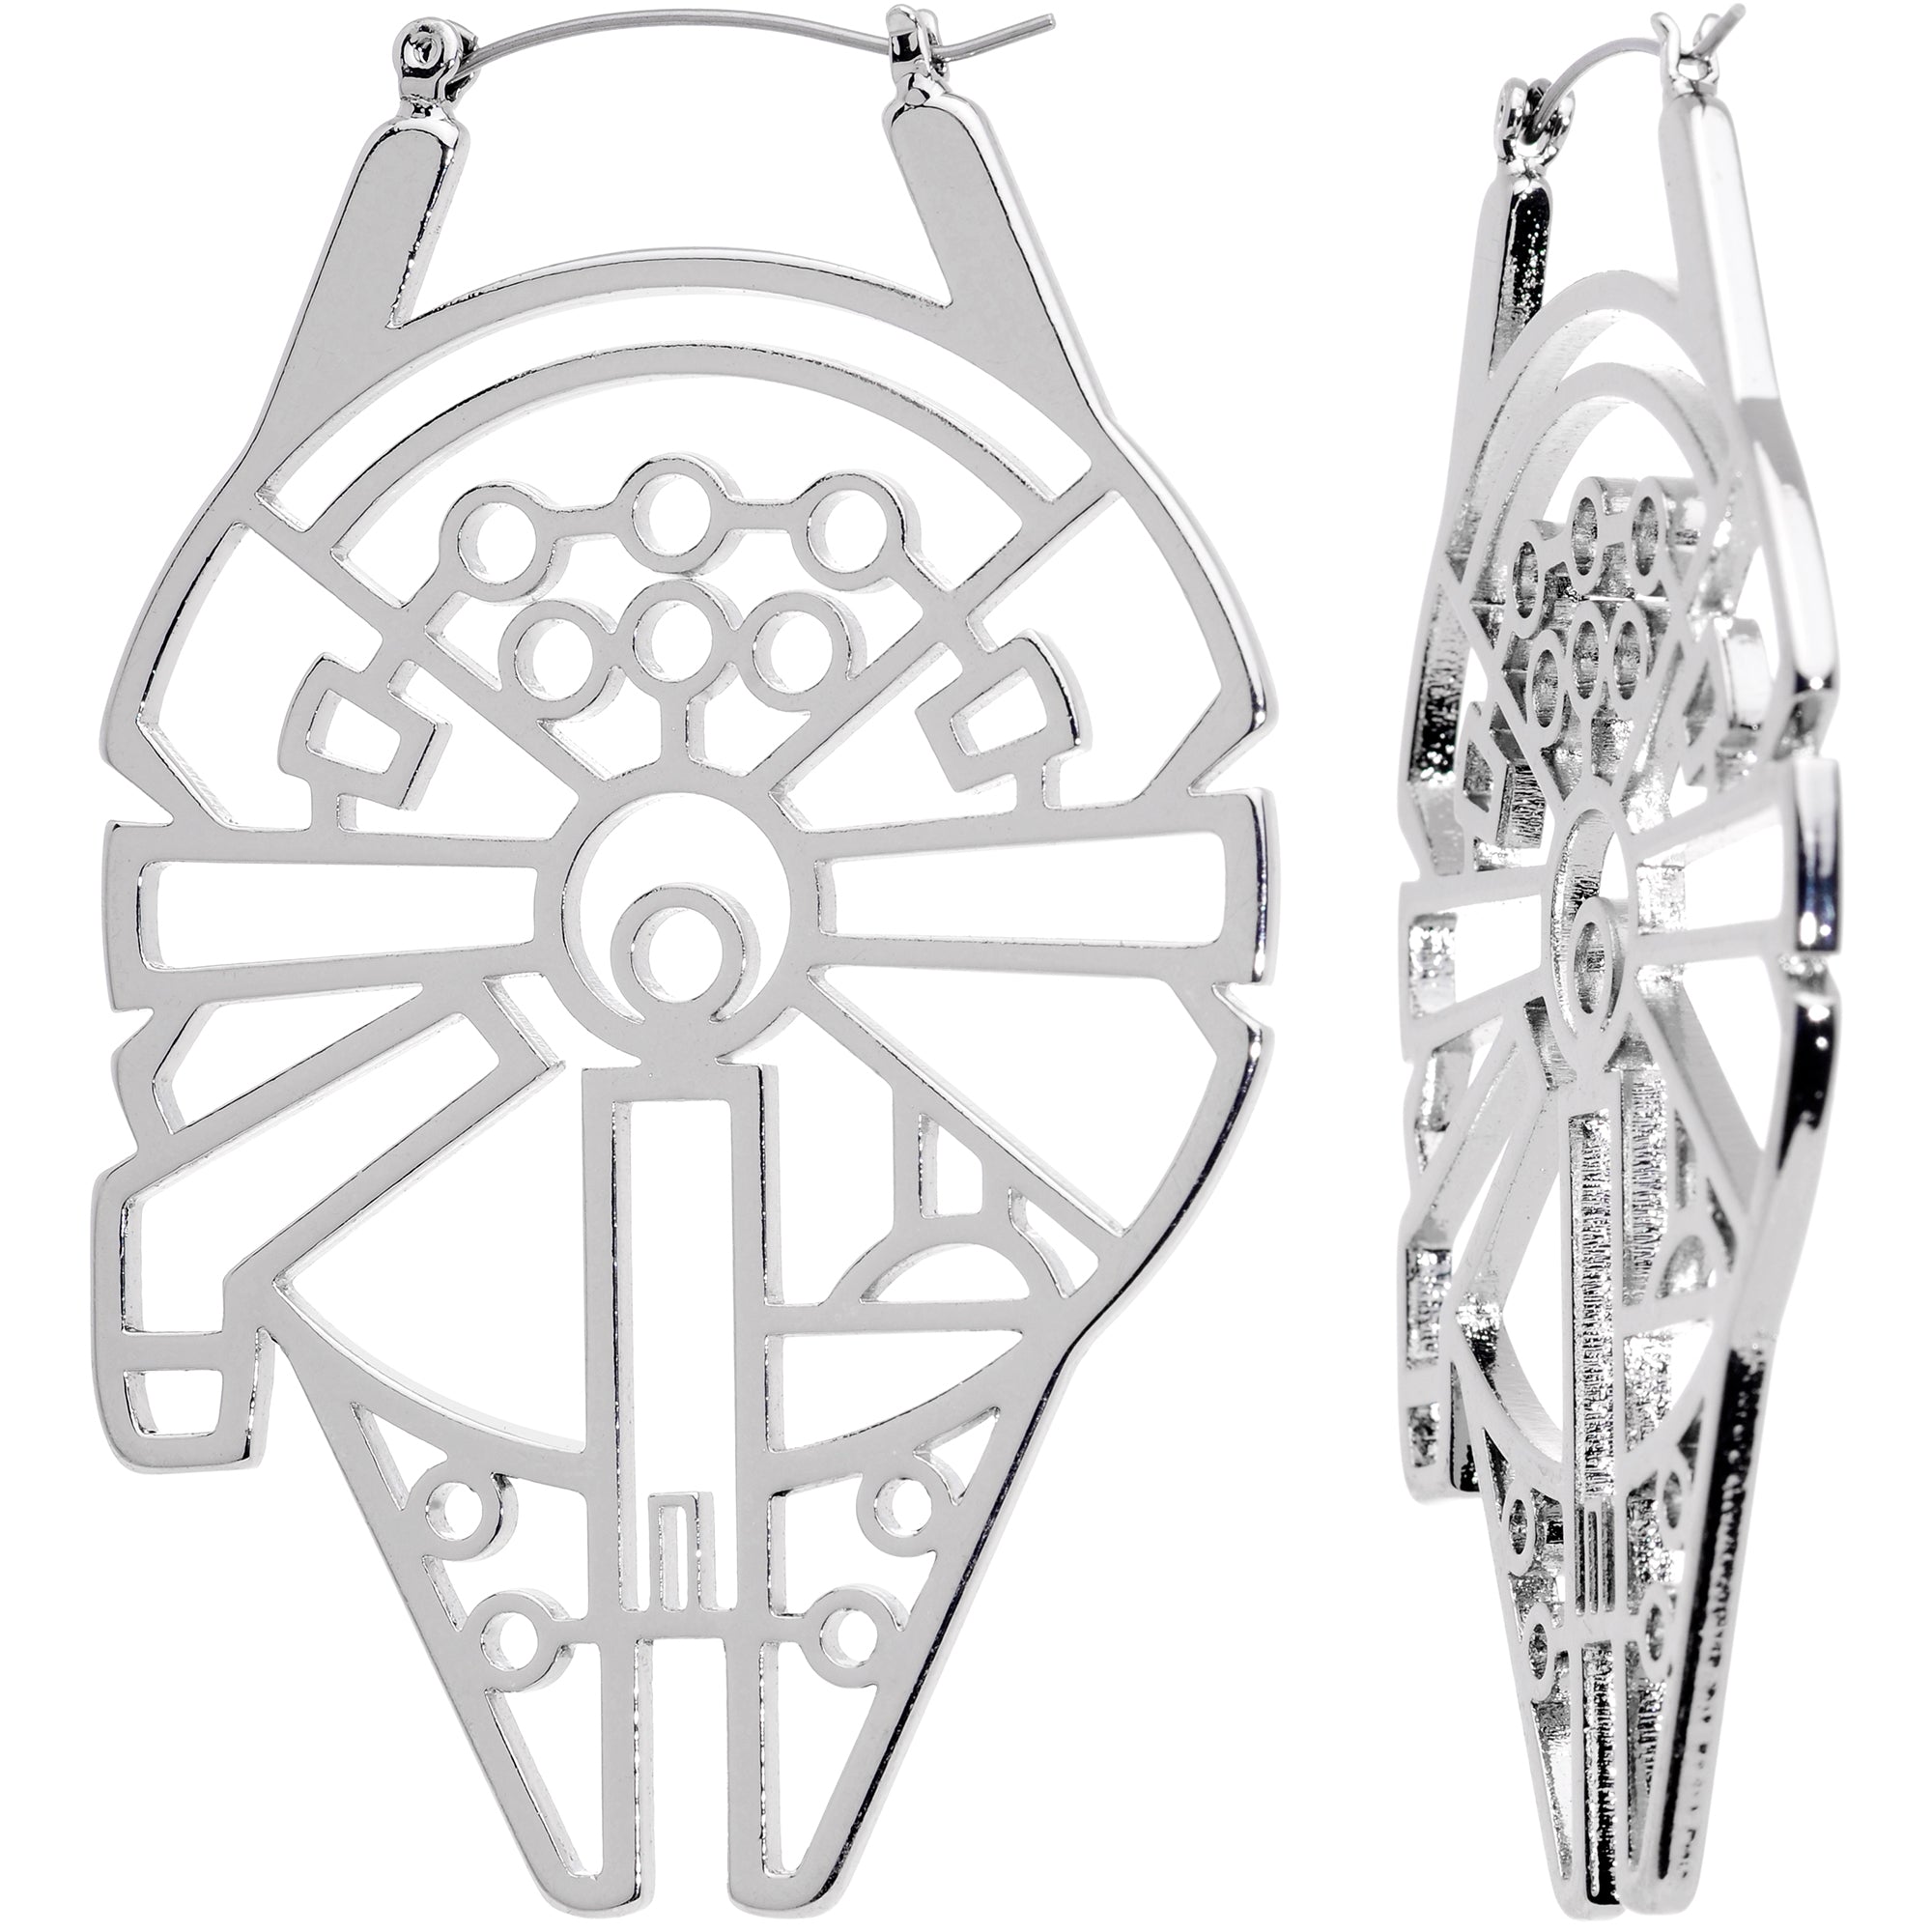 Officially Licensed Star Wars Millennium Falcon Tunnel Plug Earrings